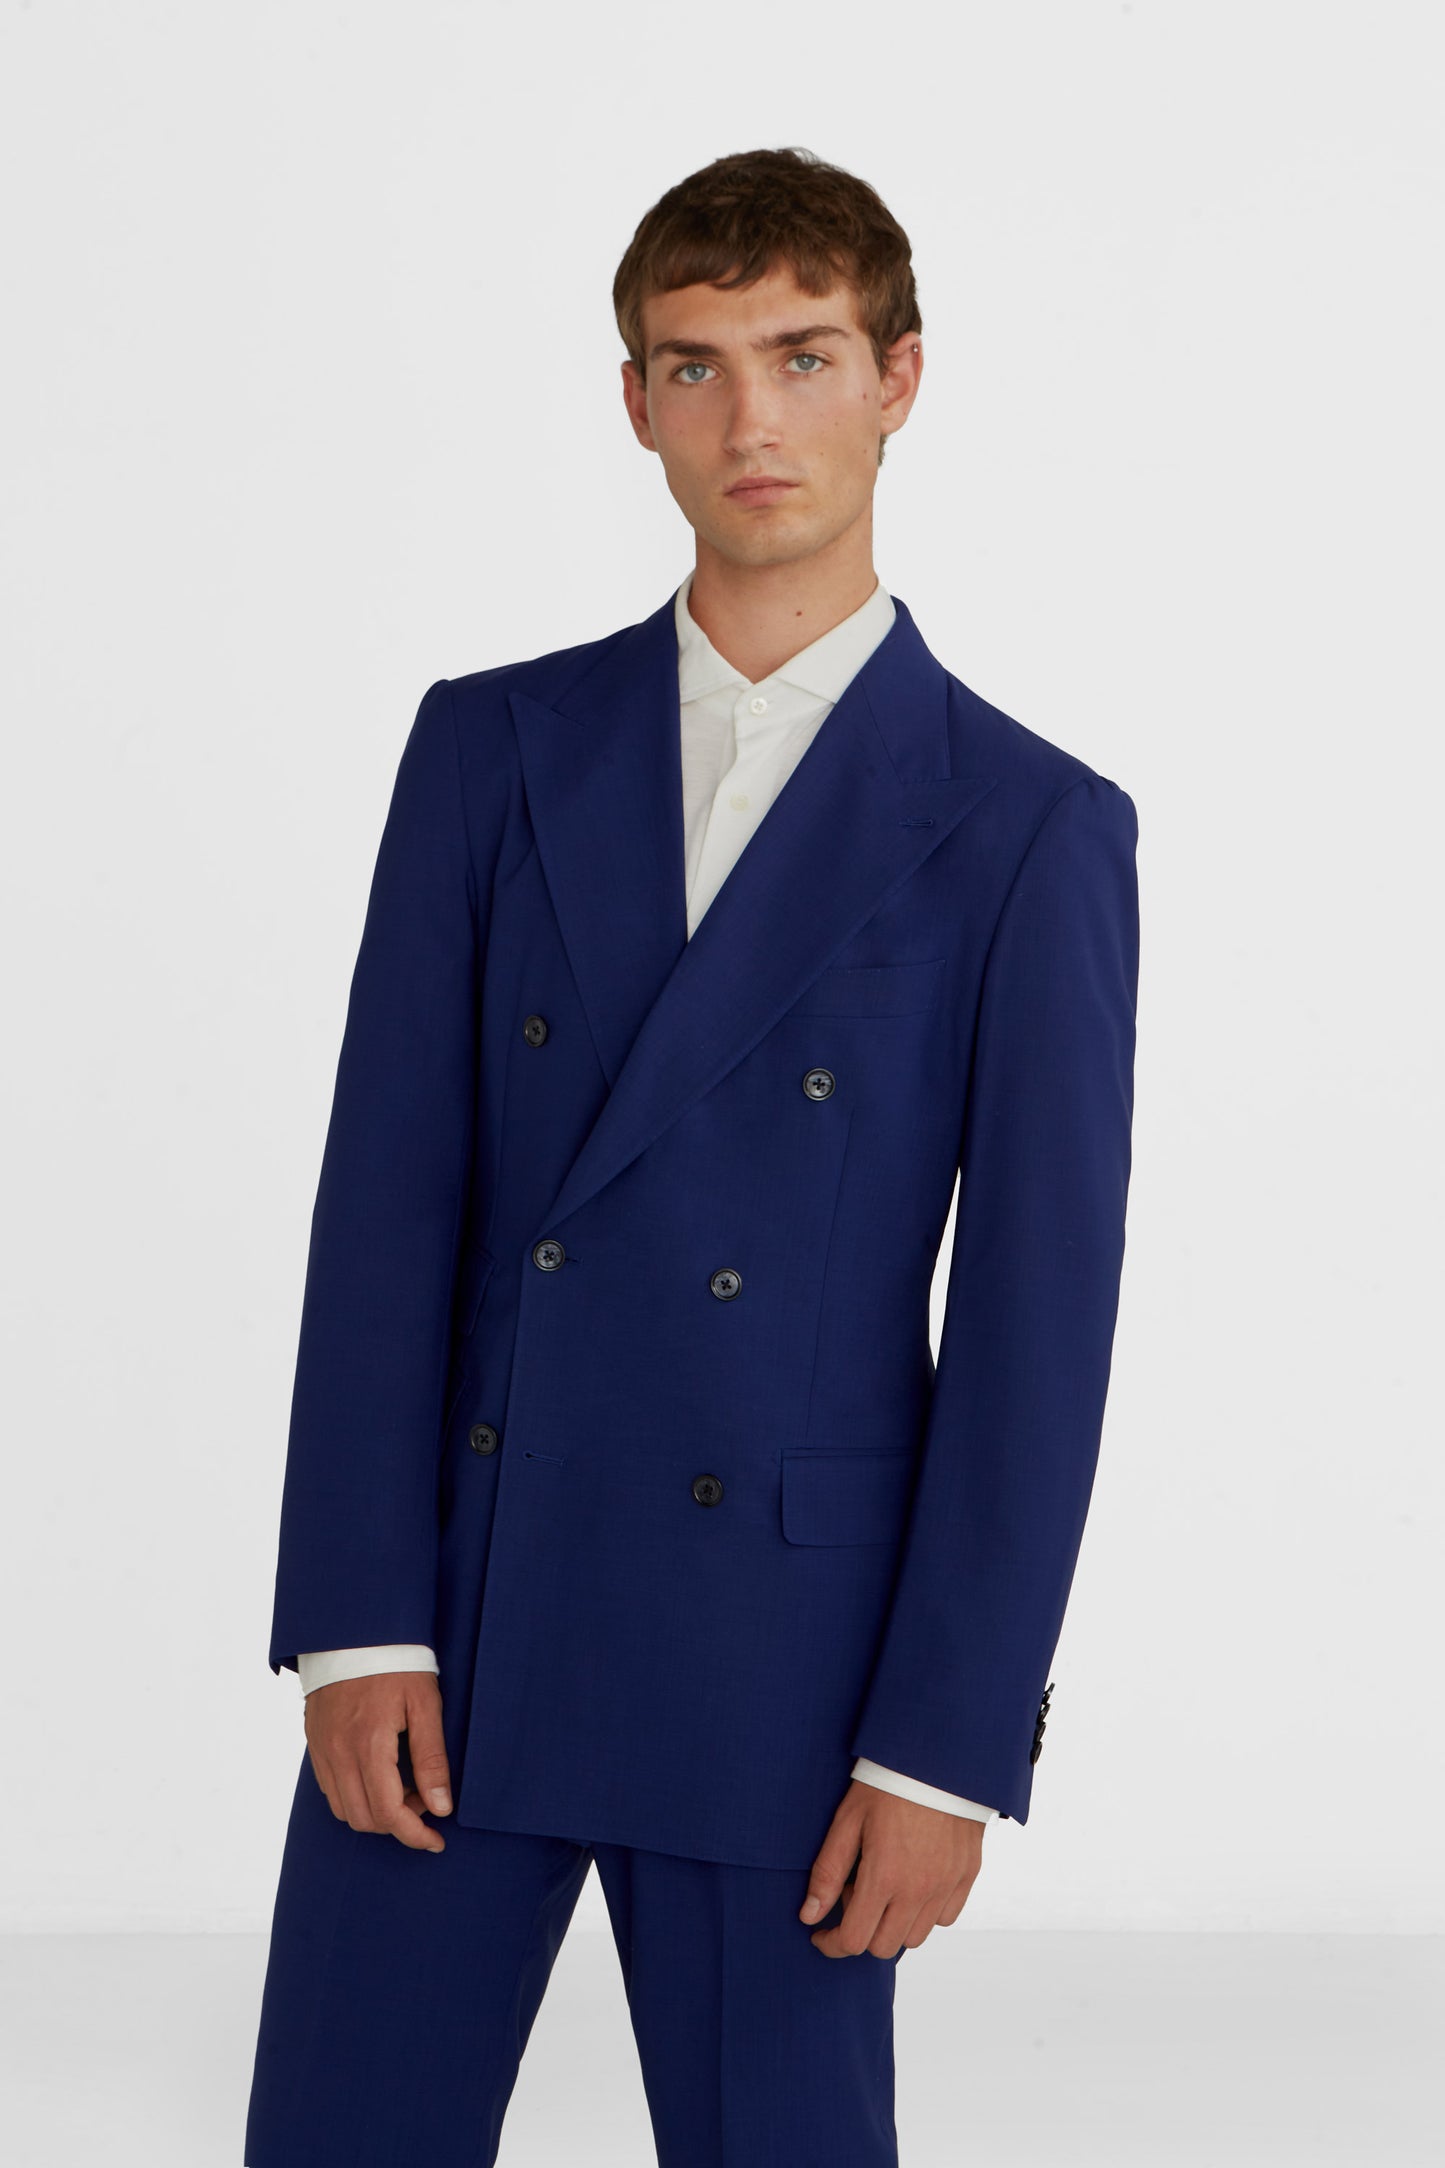 Decontructured light double - breasted suit super 120 wool